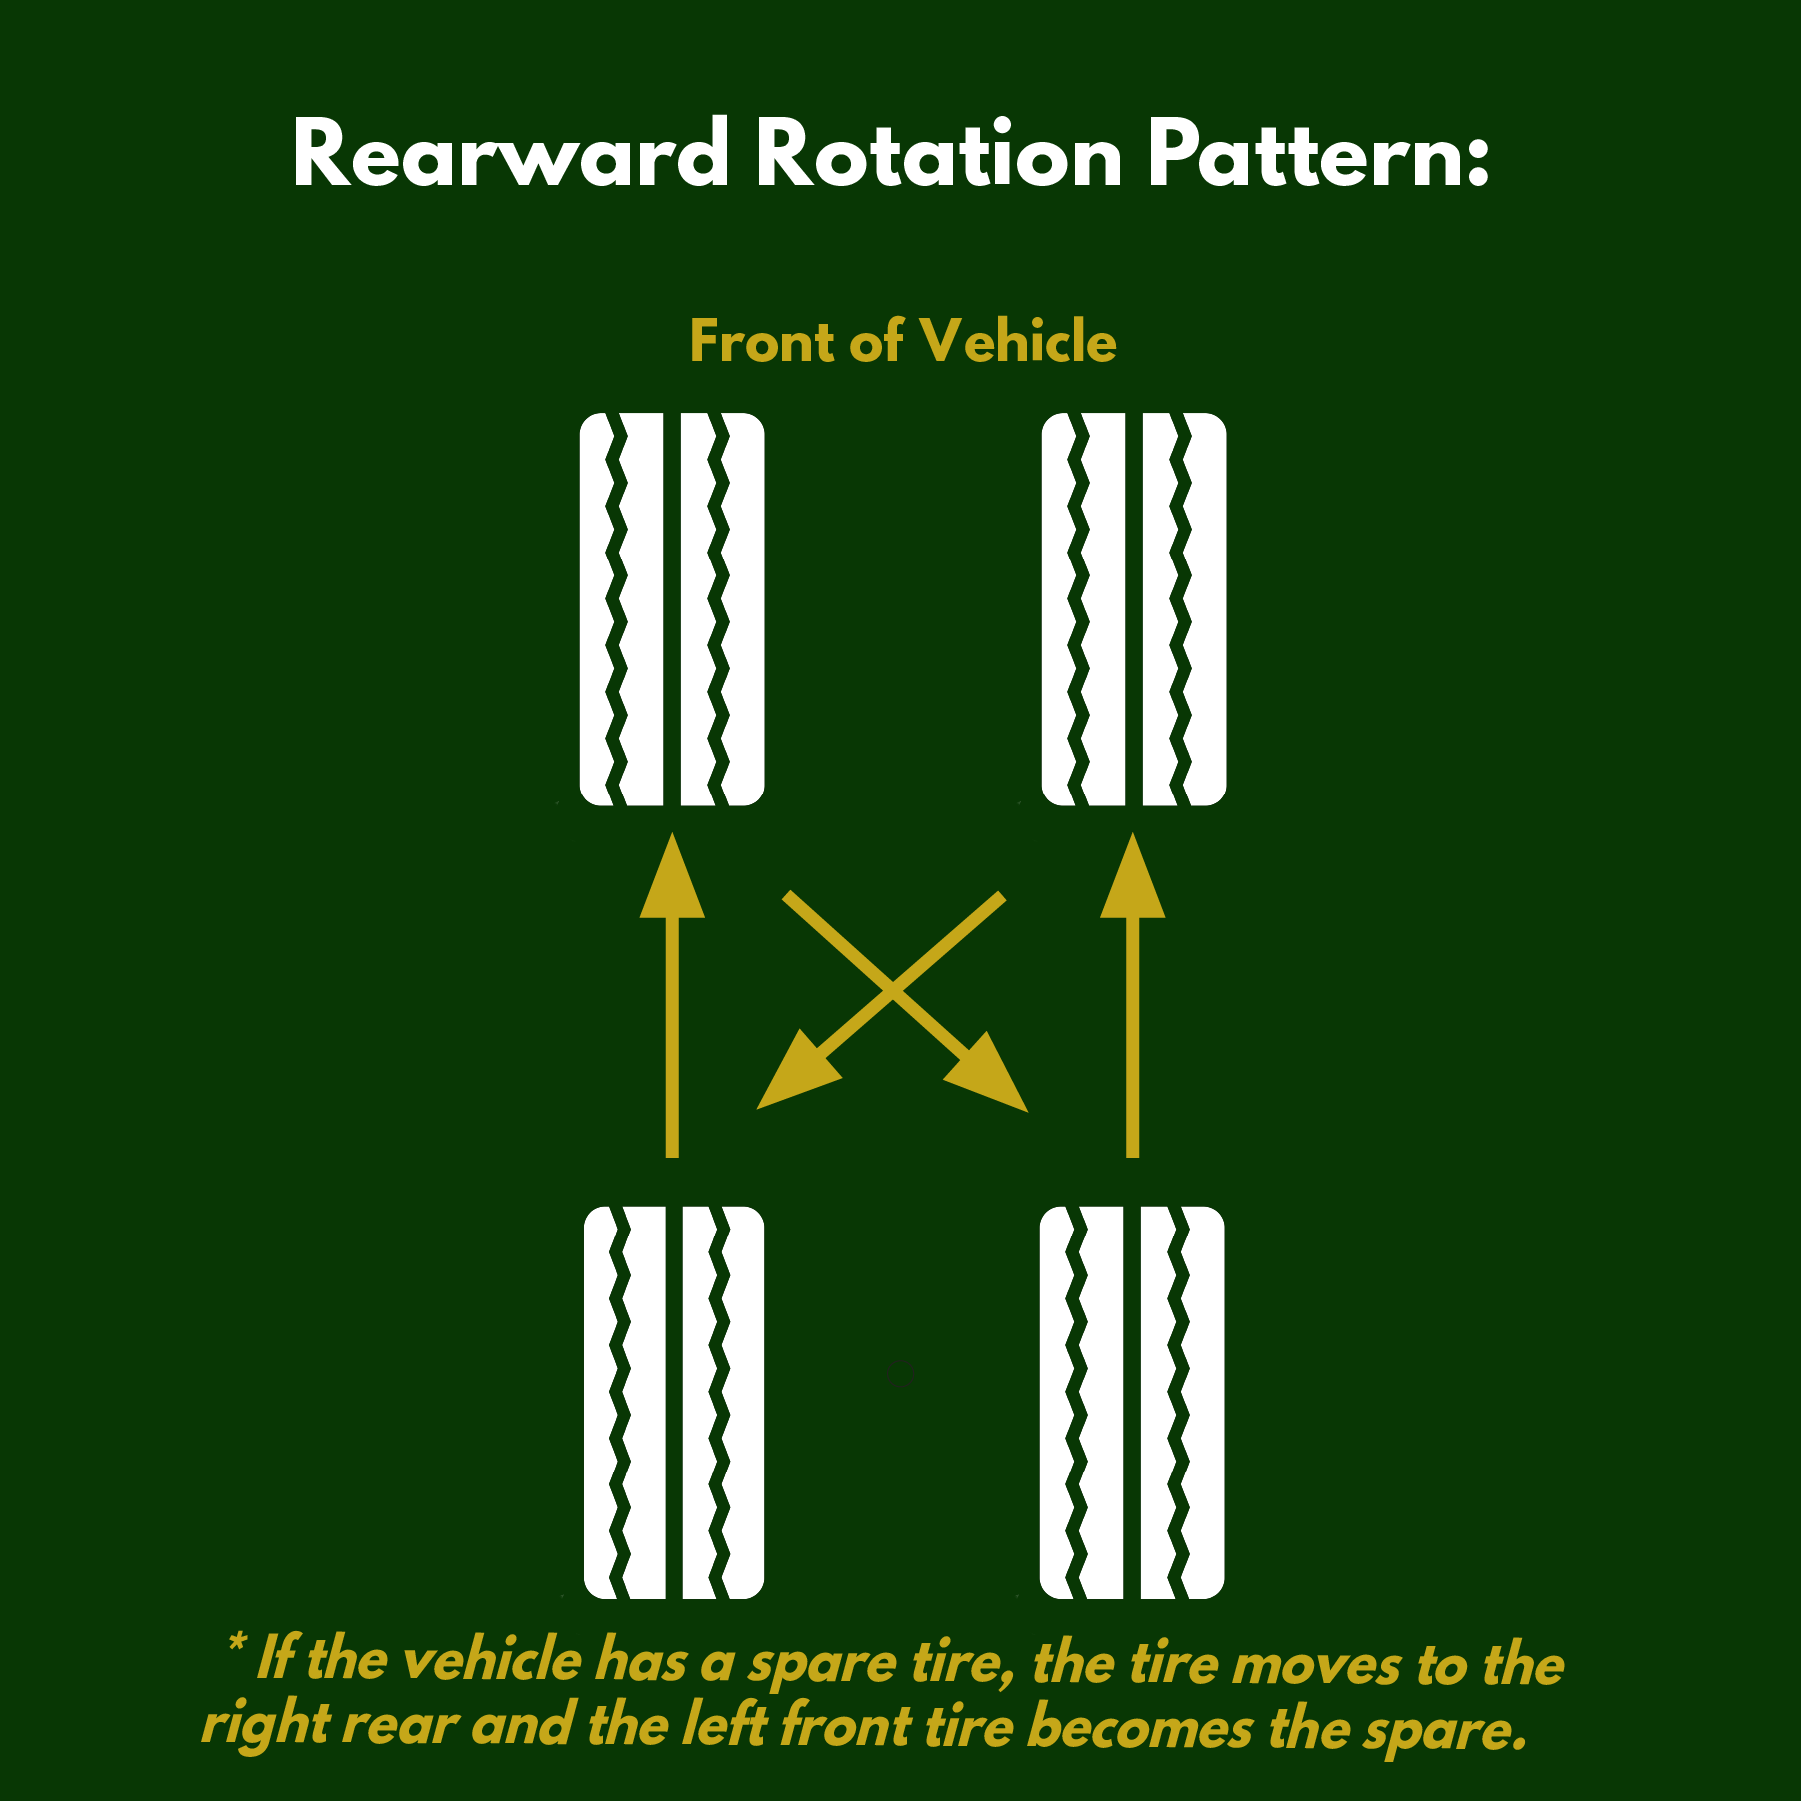 In a rearward cross tire rotation pattern, the left rear tire moves to the left front, the right rear tire moves to the right front, the right front tire moves to the left rear, and the left front tire moves to the right rear.